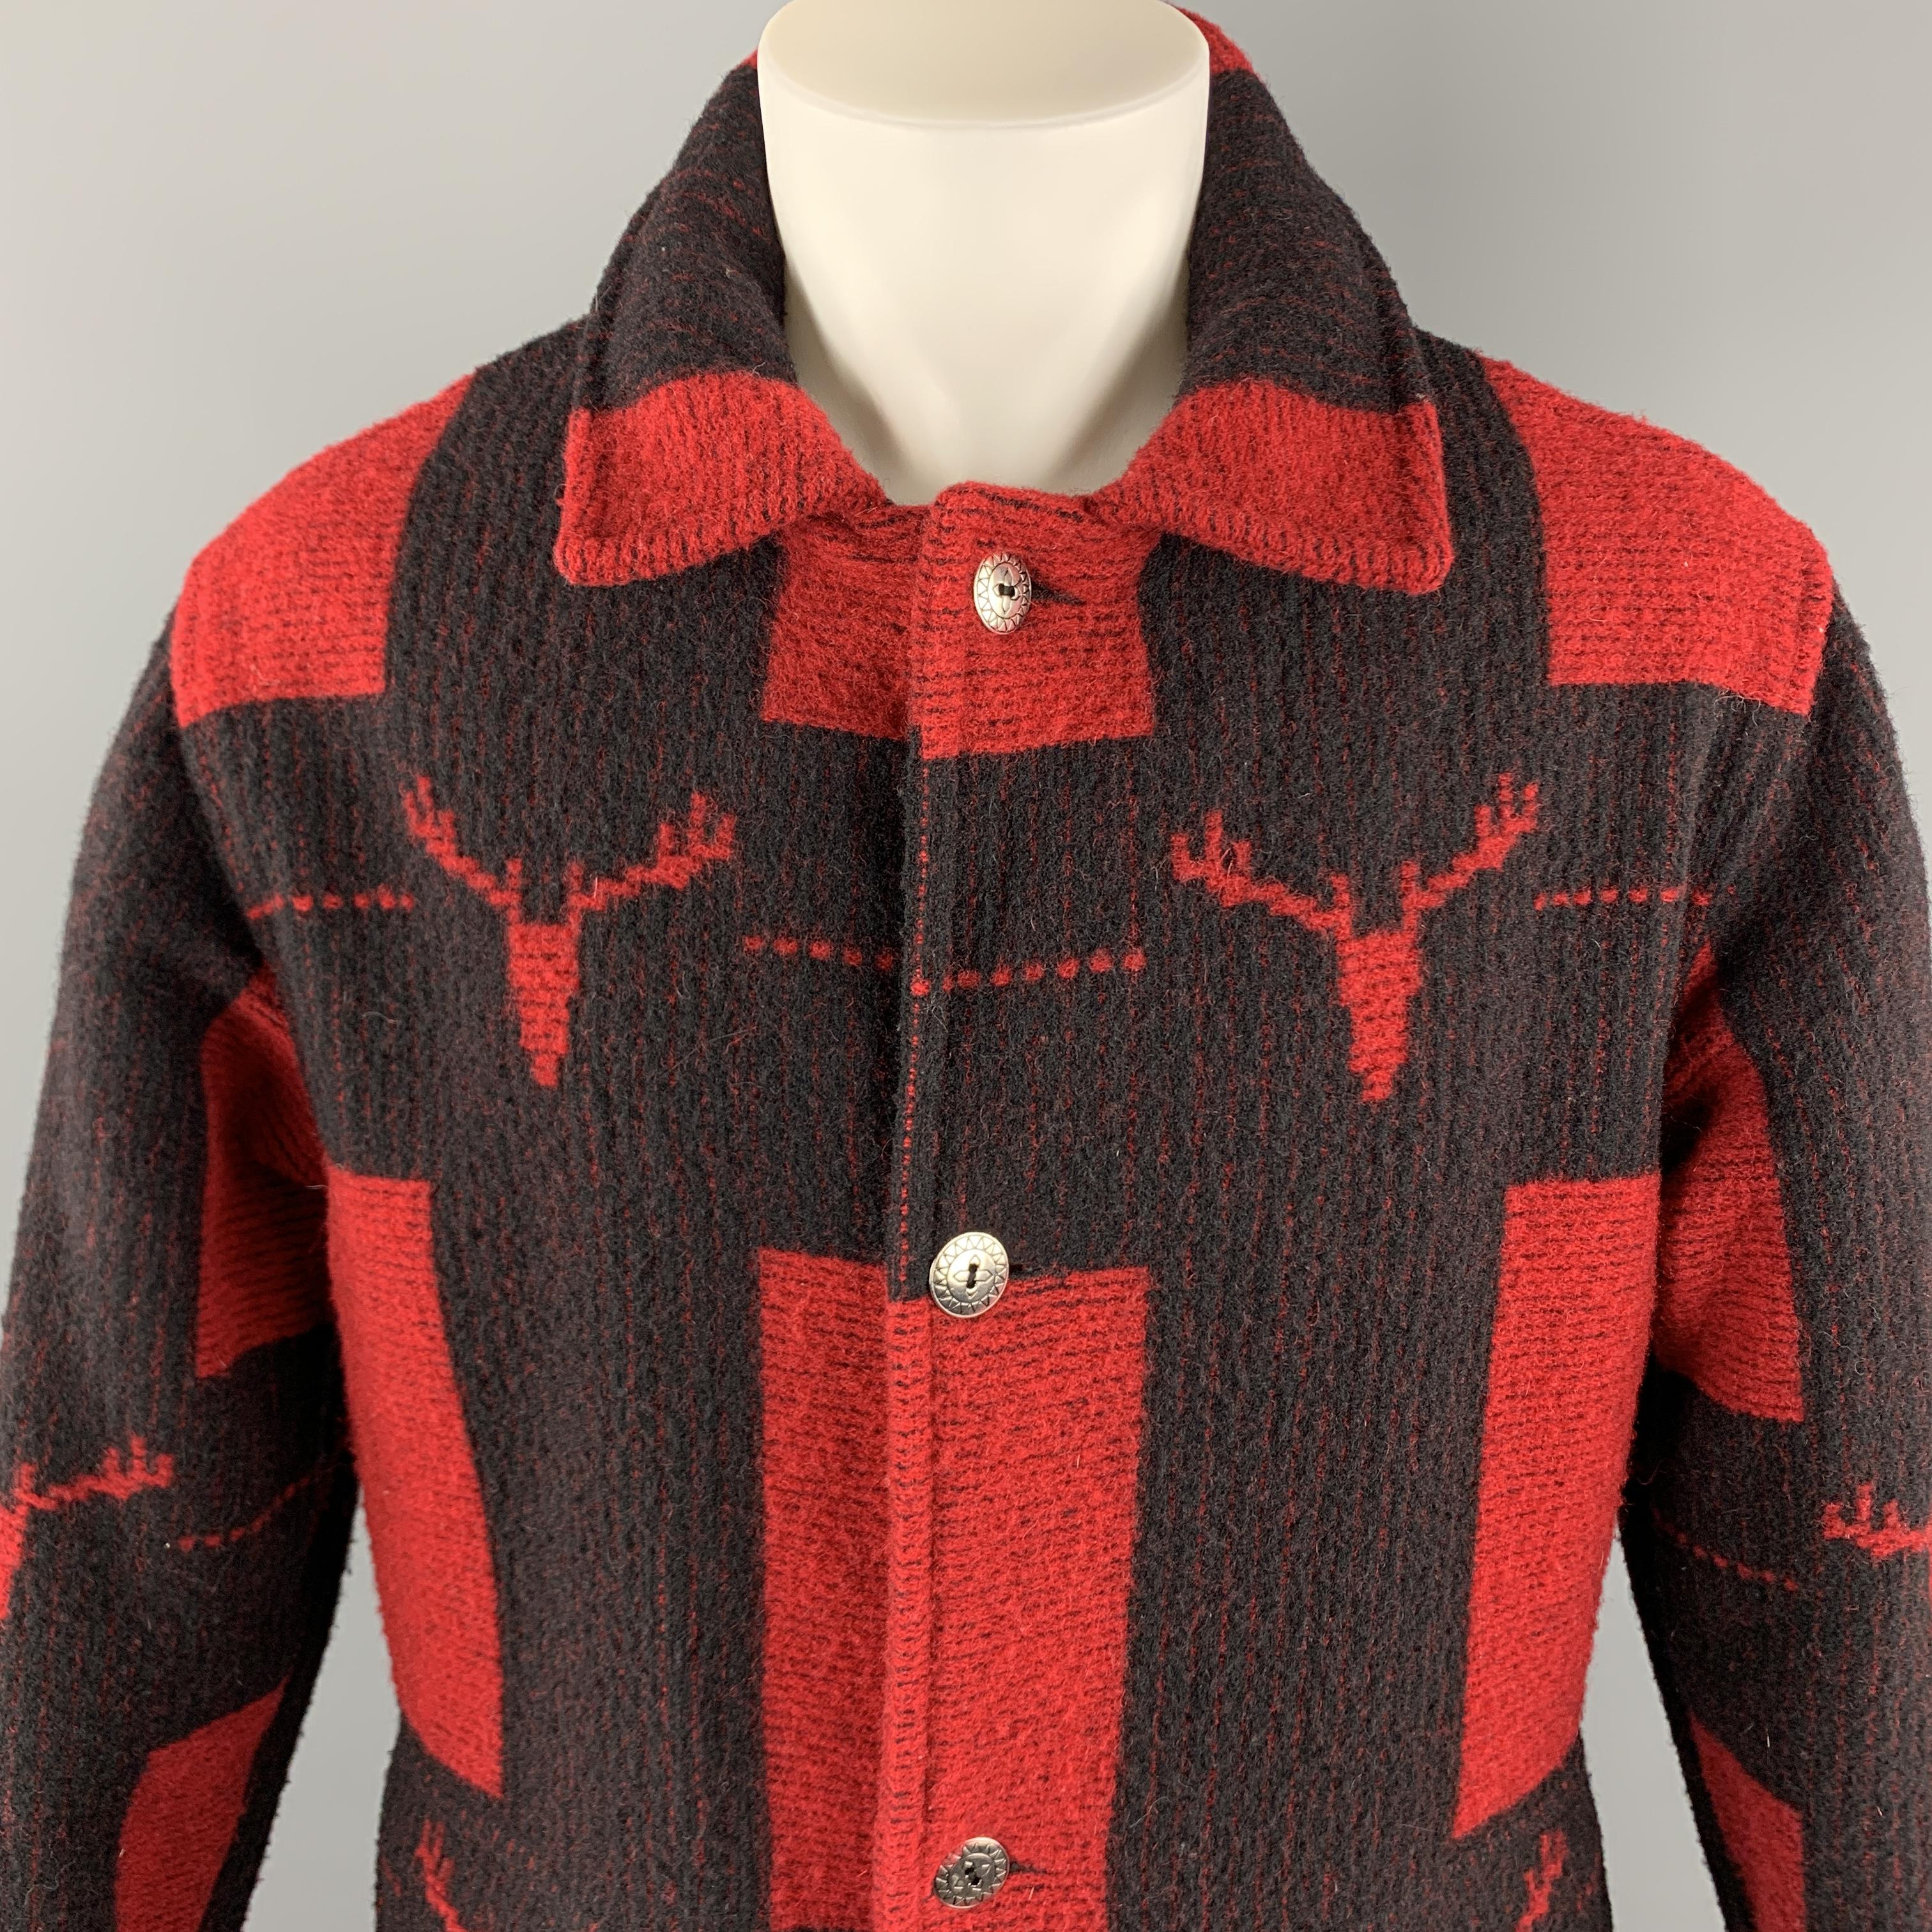 WOOLRICH Coat comes in a red and black plaid wool material, featuring four buttons at closure, silver metal tone buttons, single breasted, patch pockets, functional buttons at cuffs, unlined. Made in USA.

Excellent Pre-Owned Condition.
Marked: